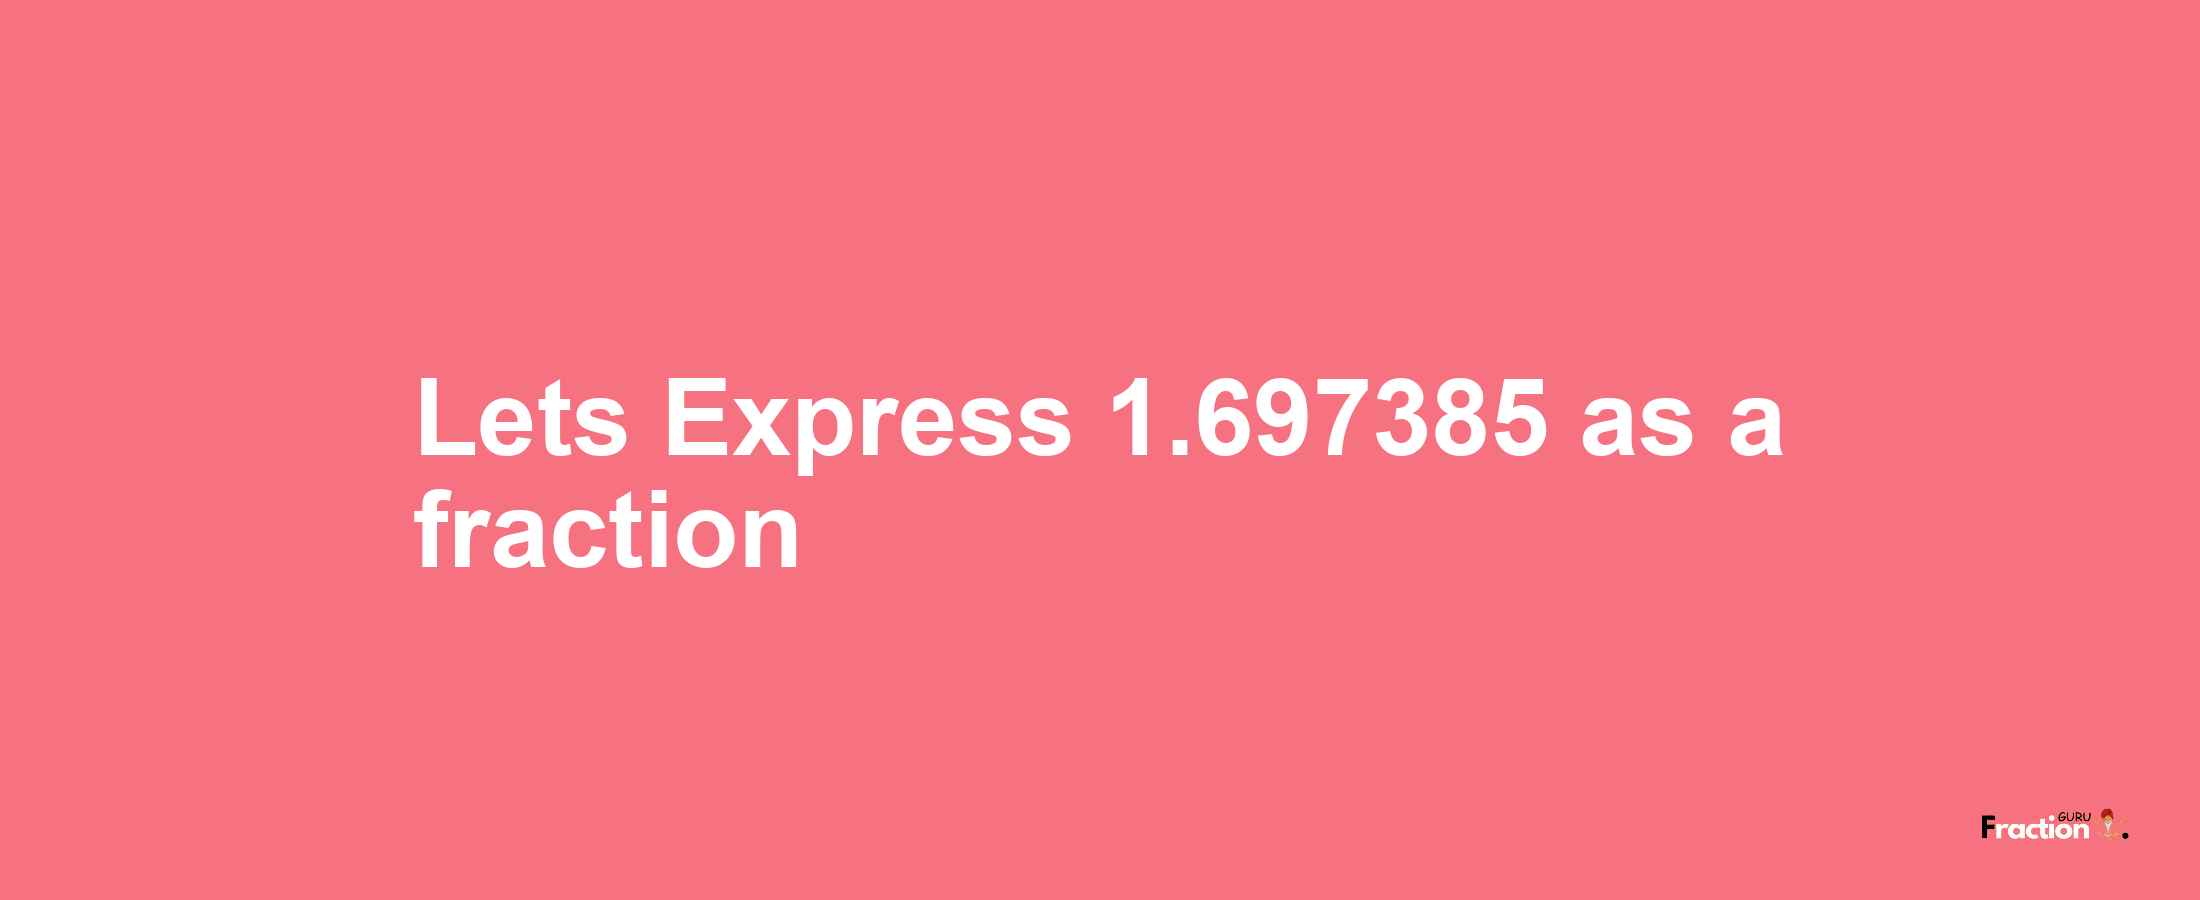 Lets Express 1.697385 as afraction